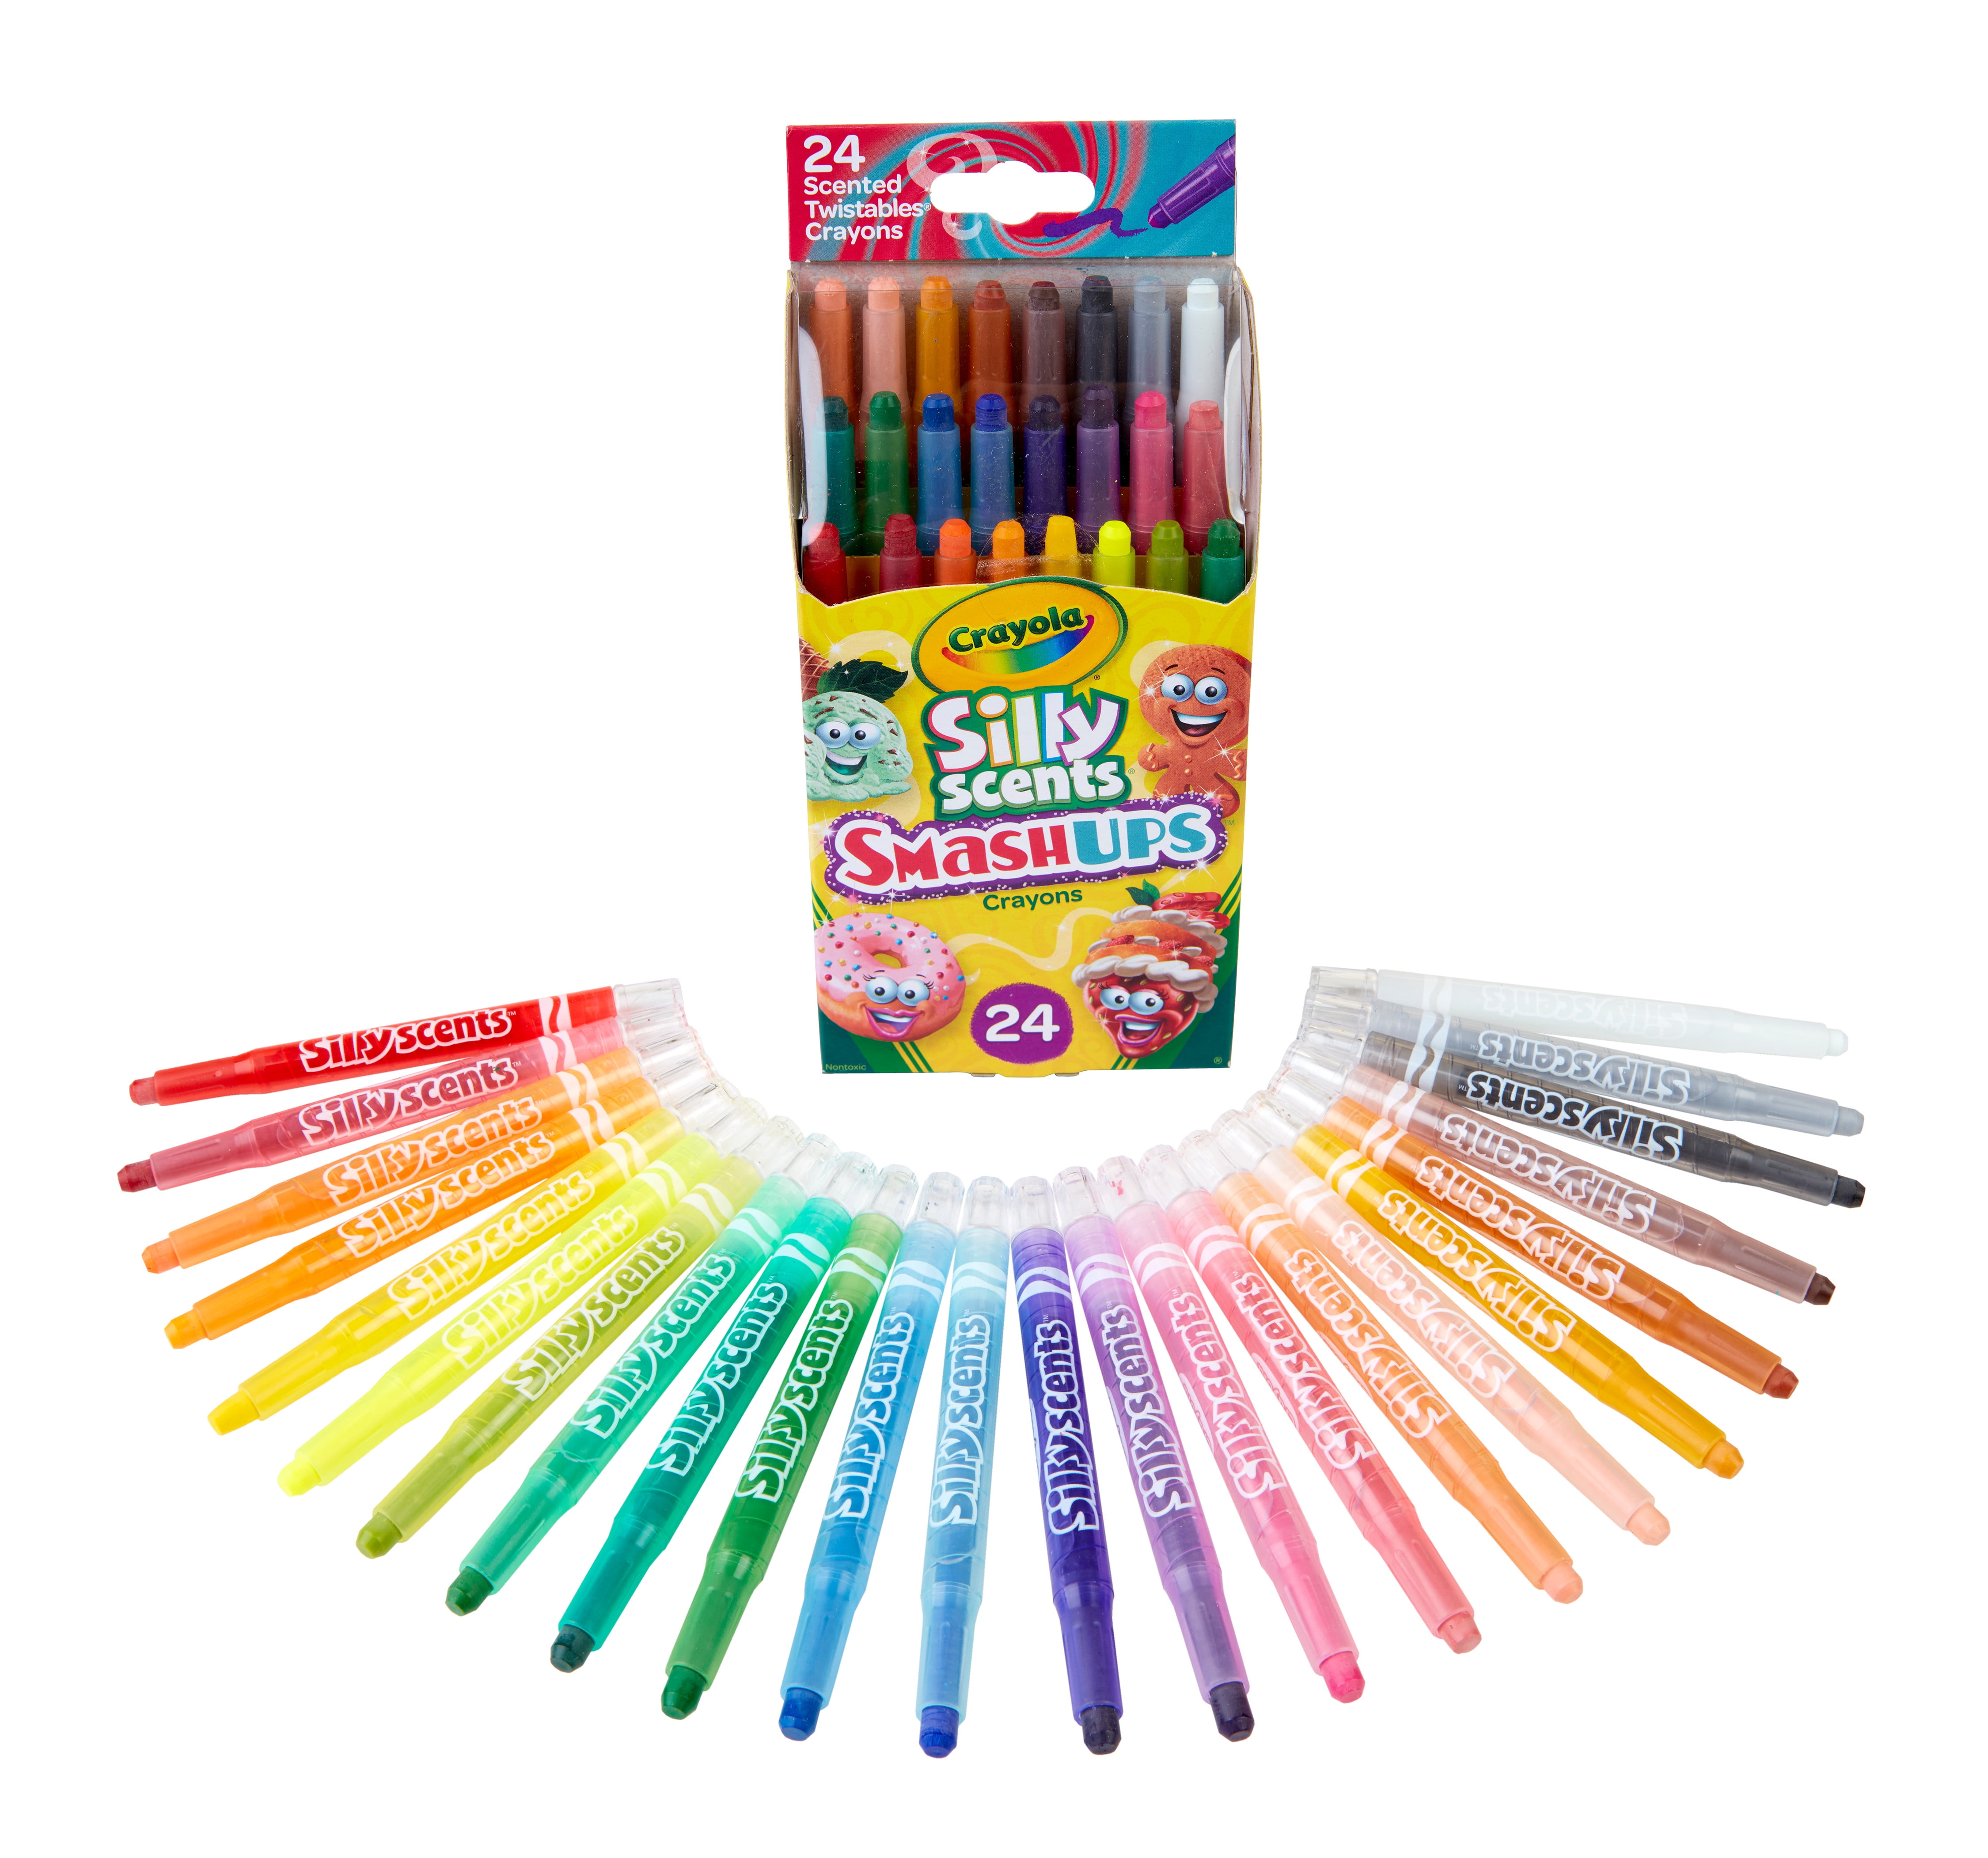 COOL CRAYONS! - Smiggle Twist-Up Crayon - Review 